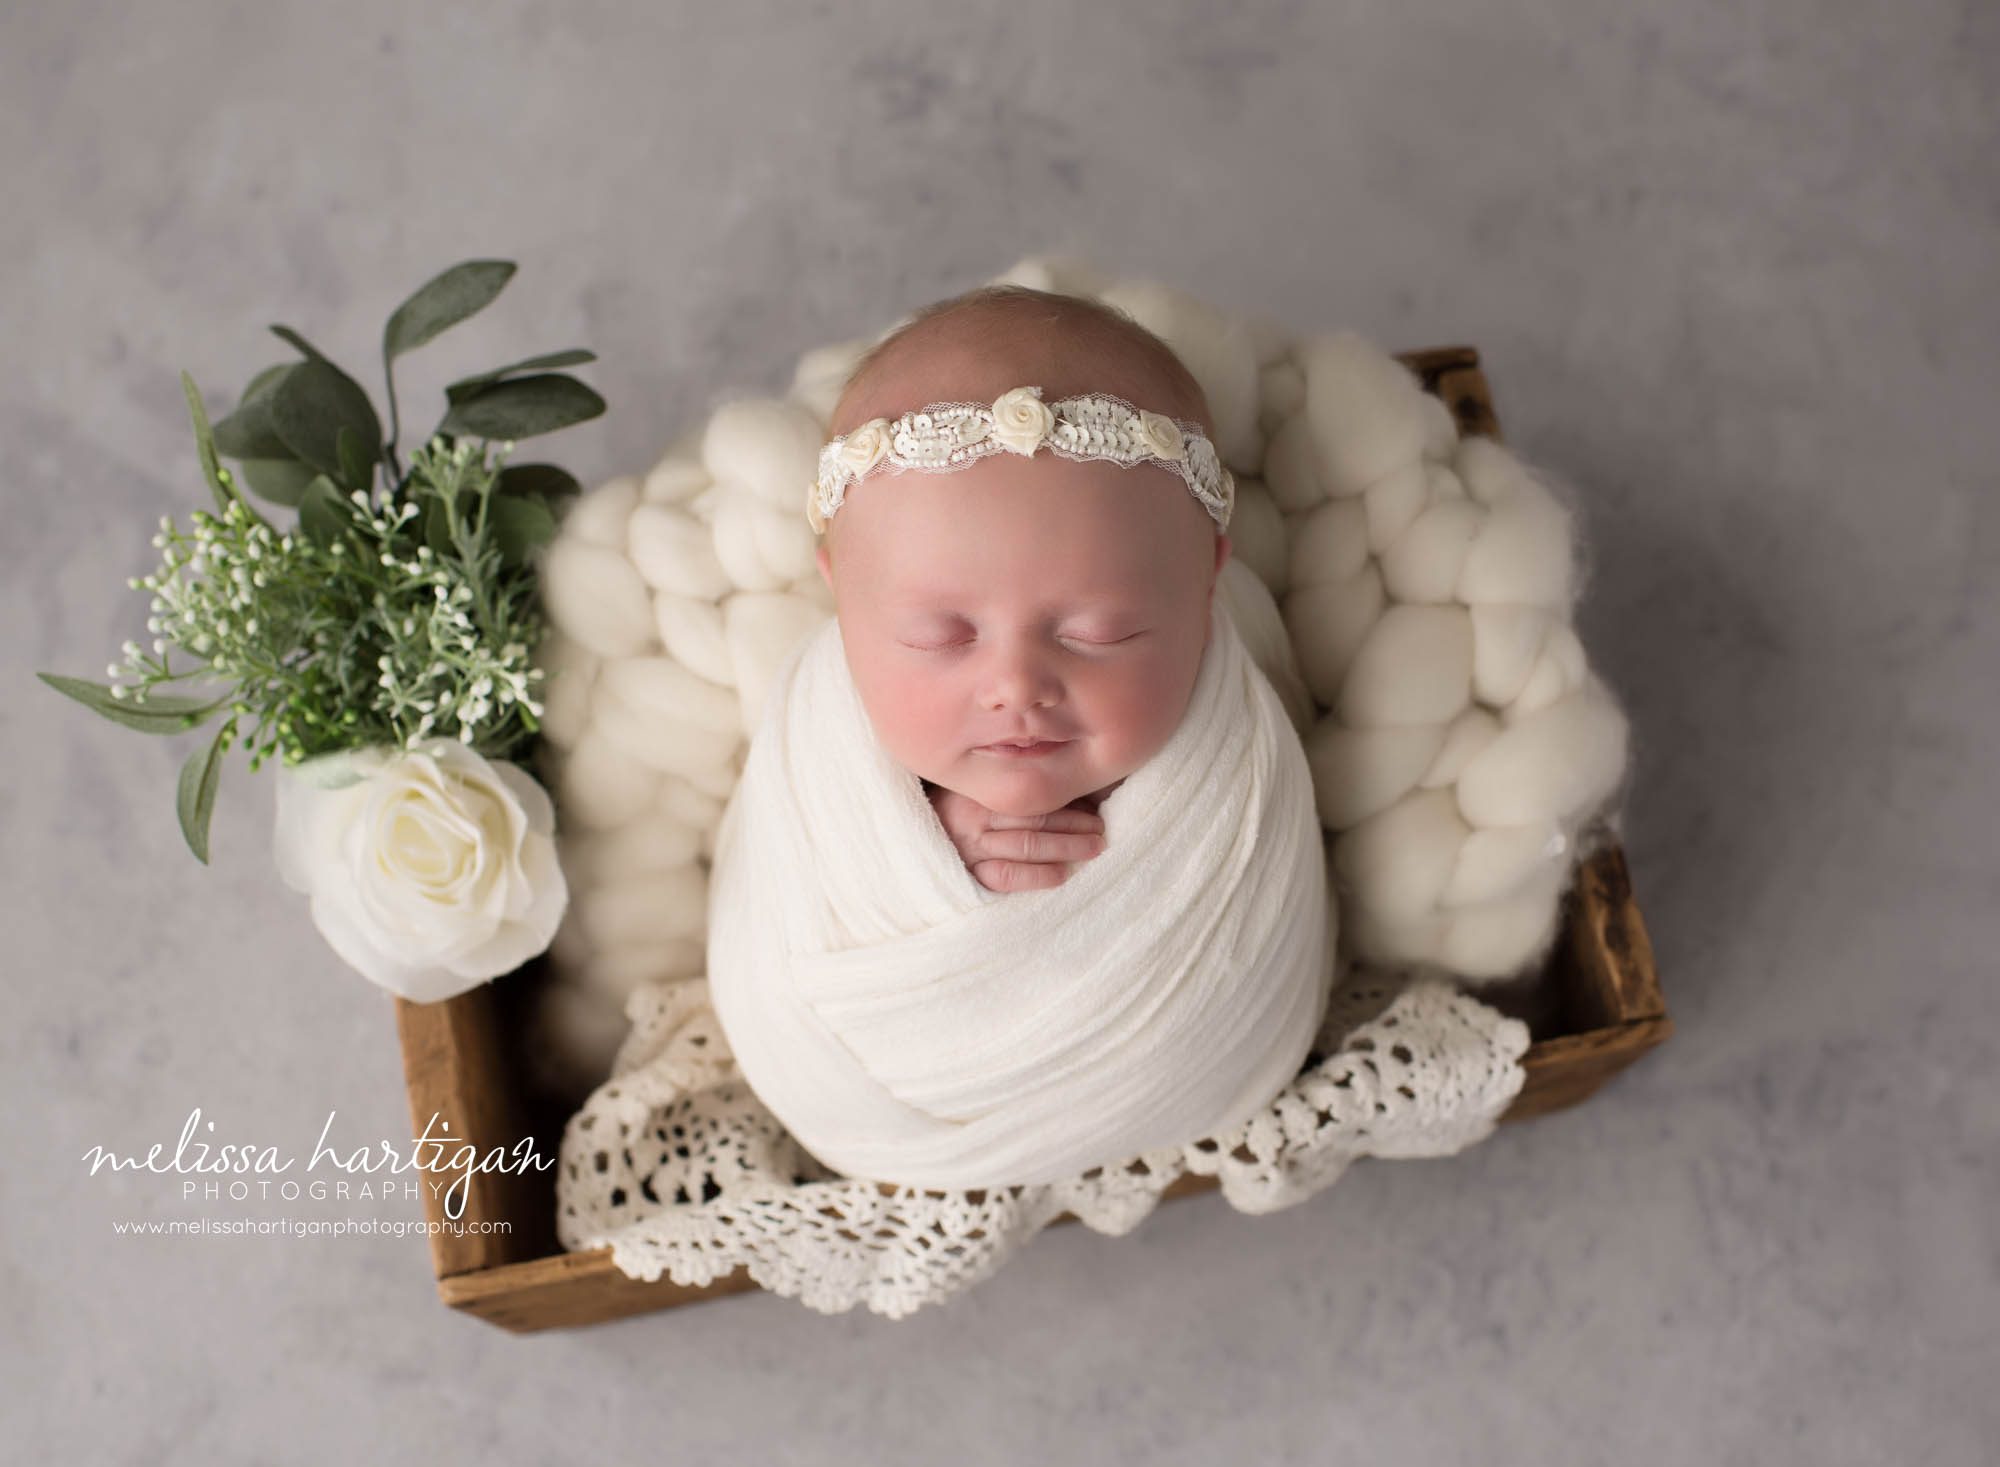 newborn baby girl wrapped in white wrap posed in wooden prop with white layers